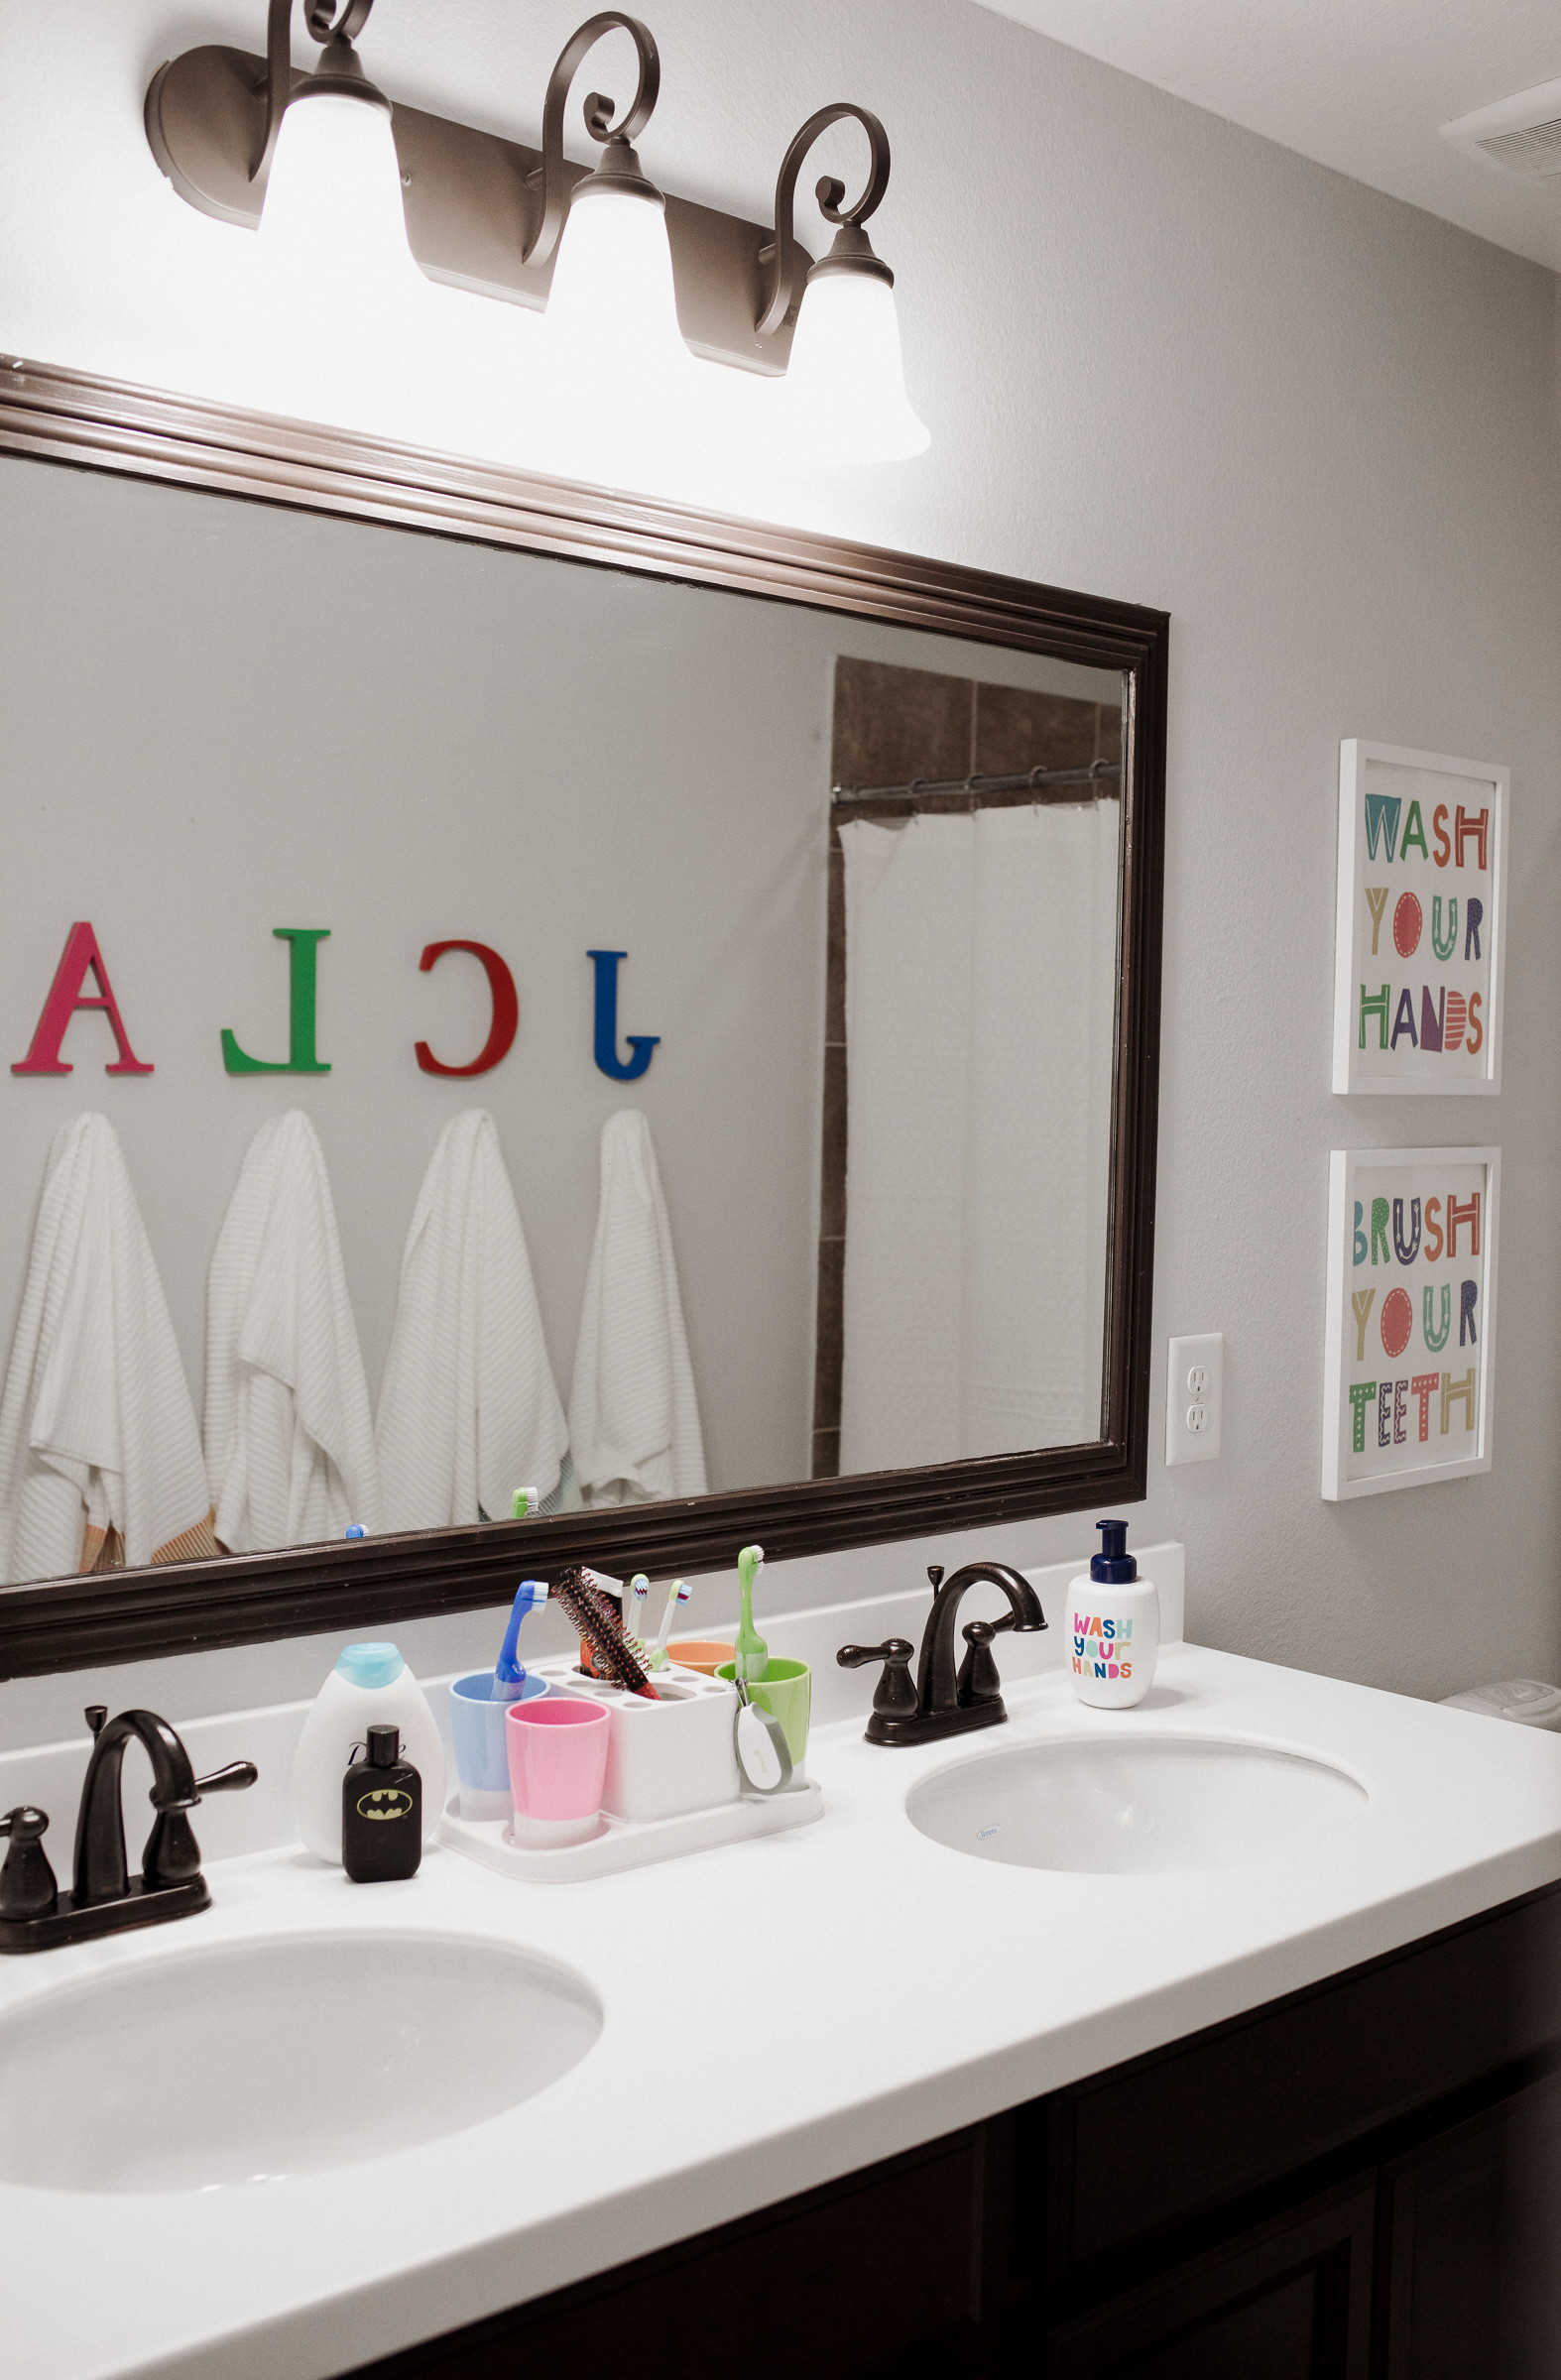 Child Bathroom Decor
 Our Kids d Bathroom Decor Makeover Uptown with Elly